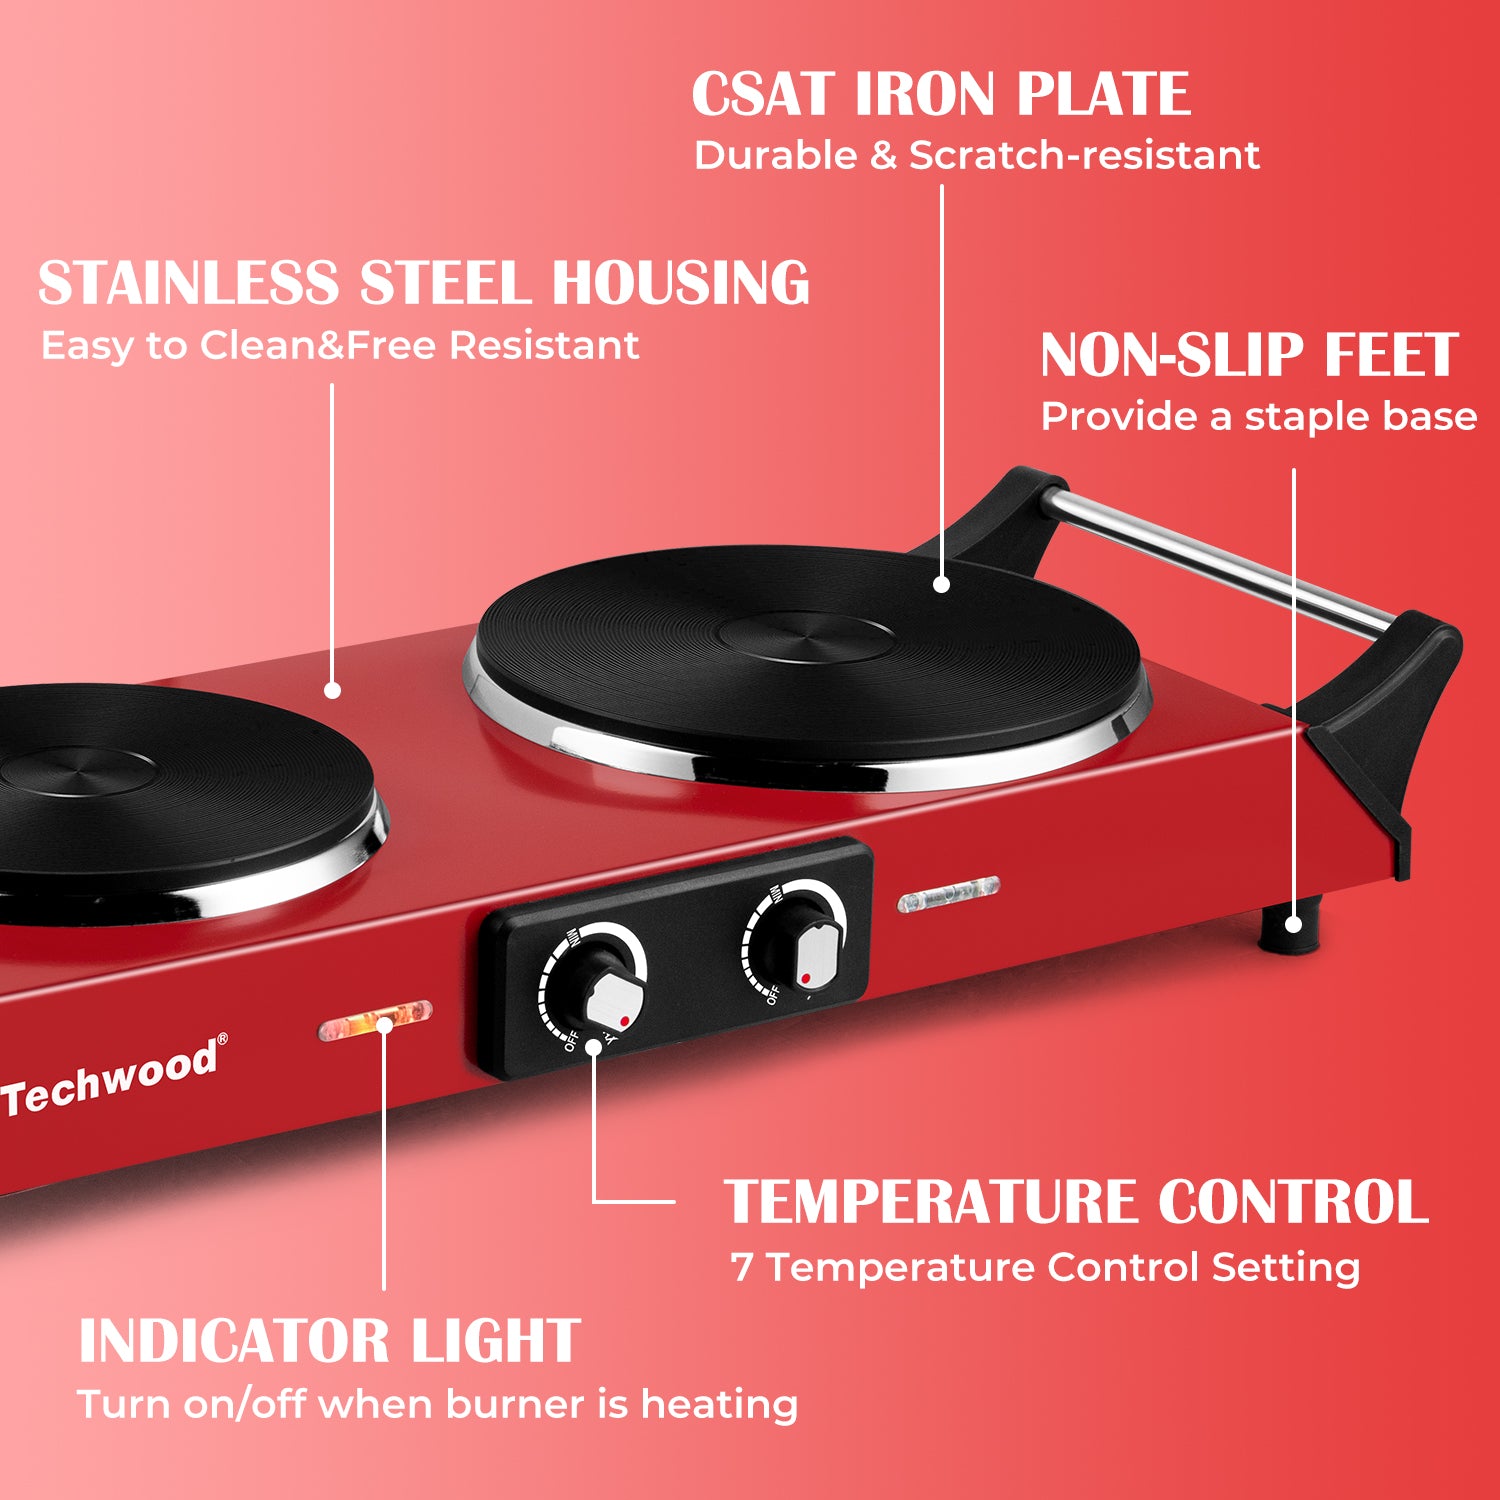 Techwood 1800W Dual Control Infrared Ceramic Electric Hot Plate with A